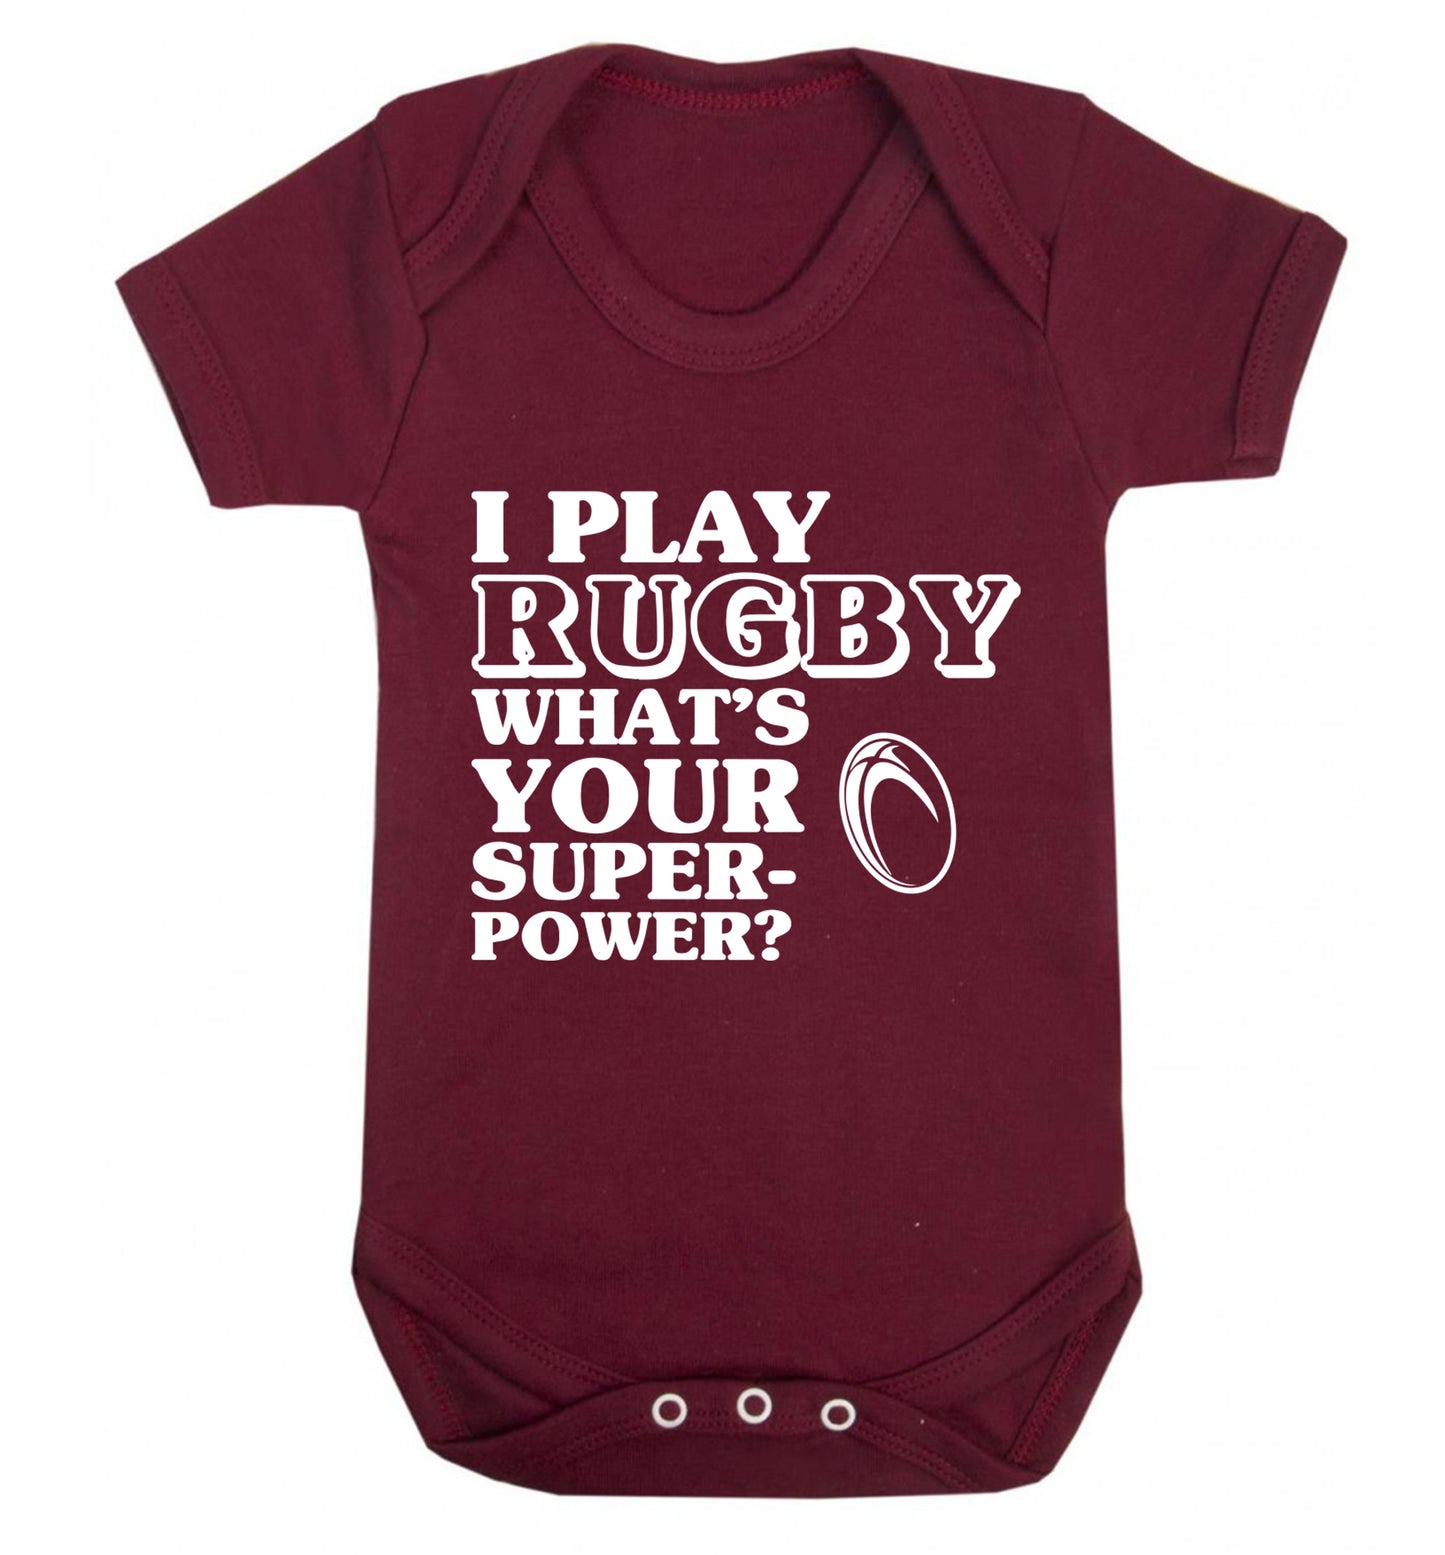 I play rugby what's your superpower? Baby Vest maroon 18-24 months